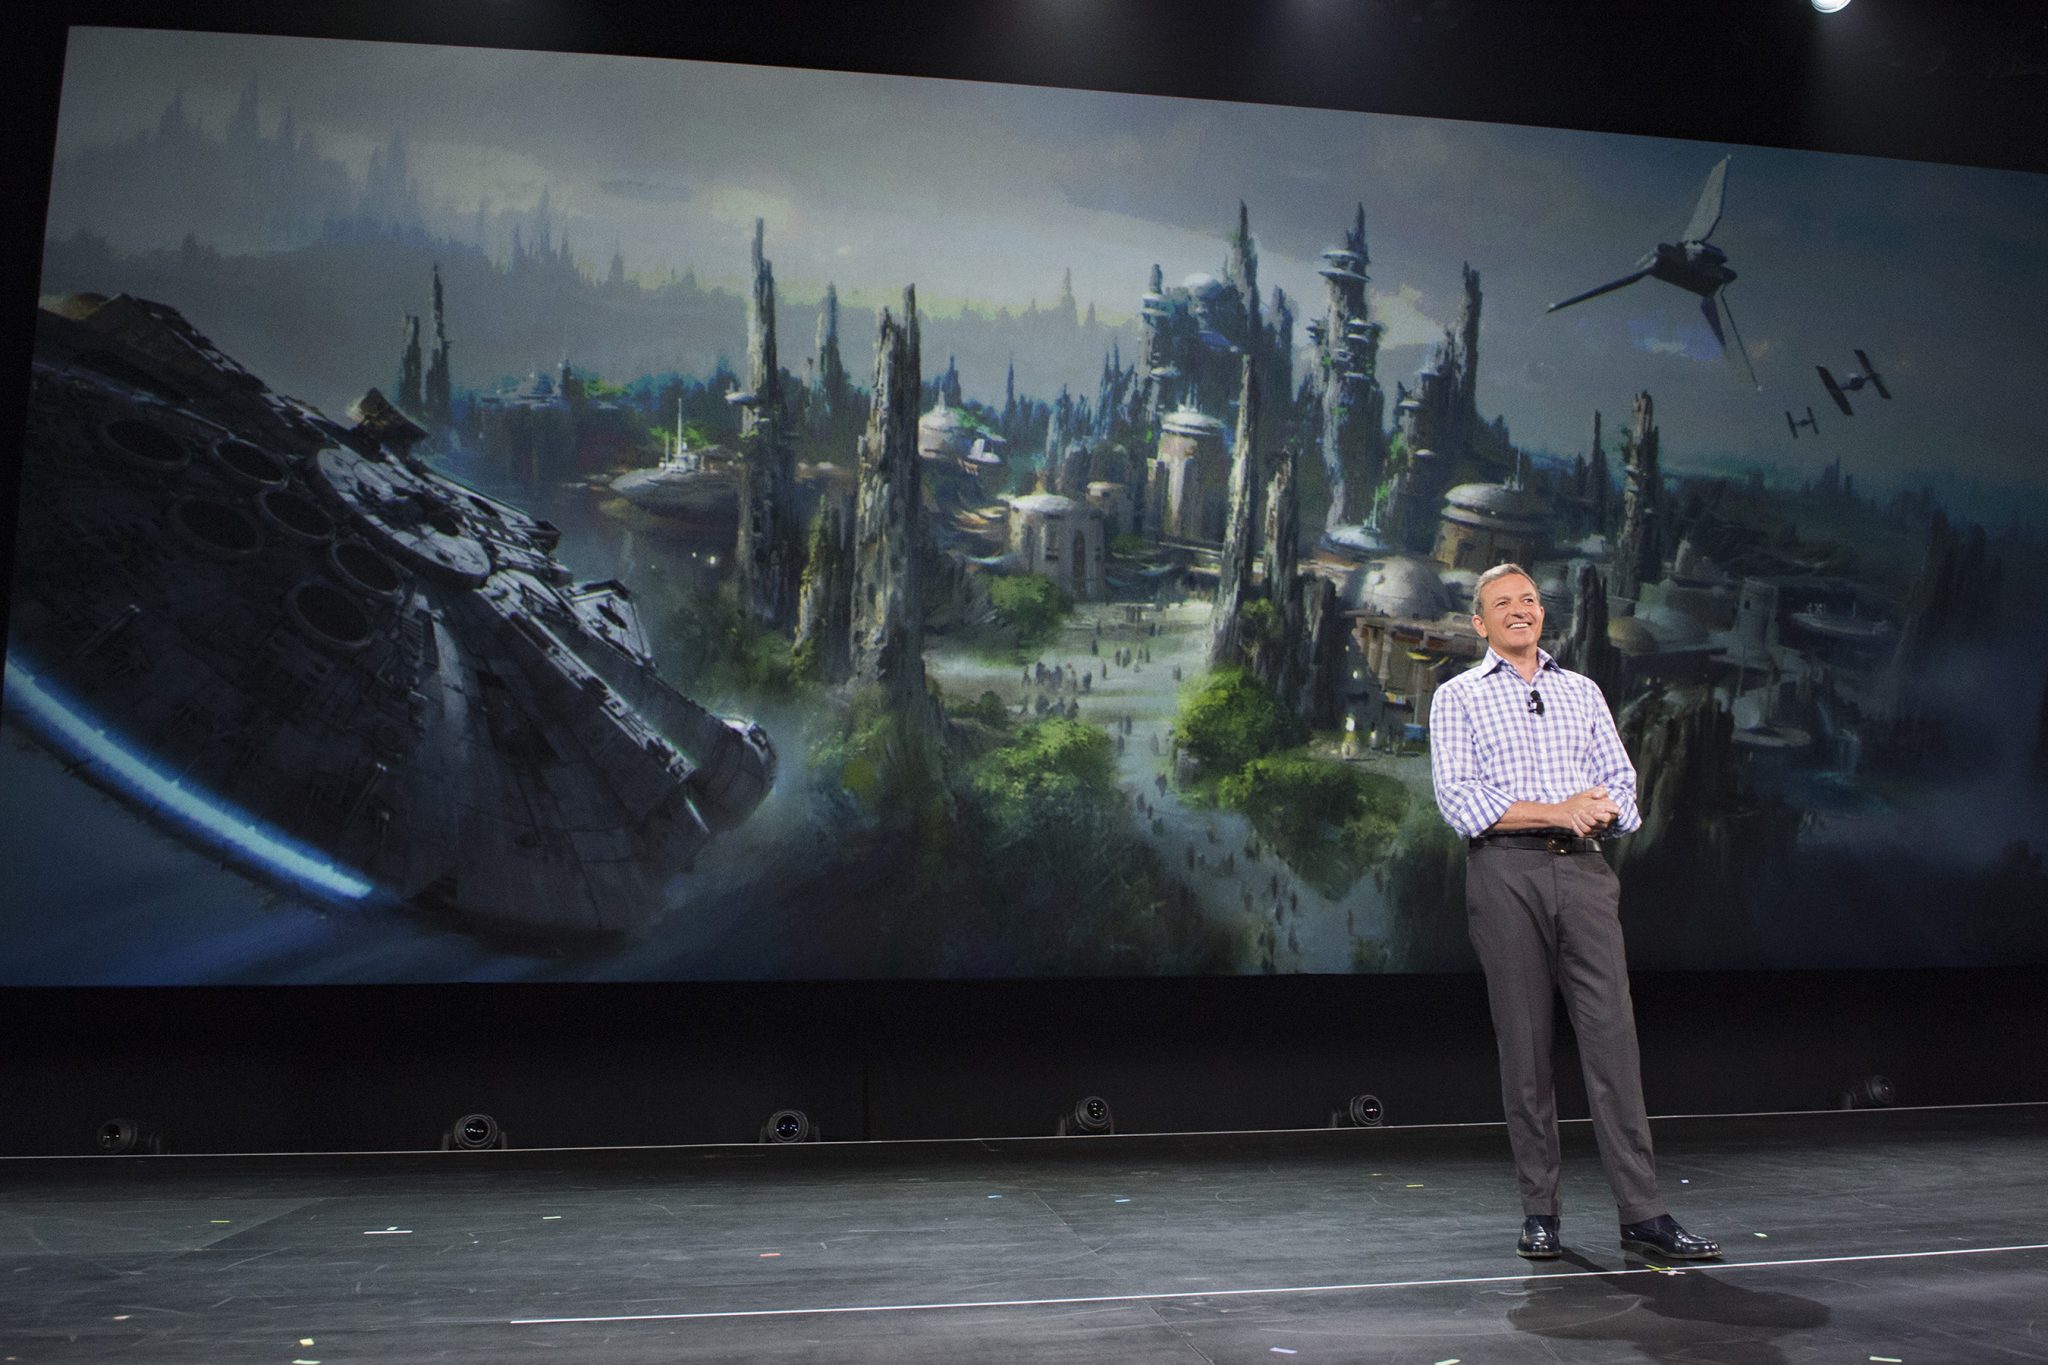 Walt Disney Company Chairman and CEO Bob Iger announced at D23 EXPO 2015 that Star Wars-themed lands will be coming to Disneyland park in Anaheim, Calif., and DisneyÕs Hollywood Studios in Orlando, Fla., creating DisneyÕs largest single-themed land expansions ever at 14-acres each, transporting guests to a never-before-seen planet, a remote trading port and one of the last stops before wild space where Star Wars characters and their stories come to life. These authentic lands will have two signature attractions, including the ability to take the controls of one of the most recognizable ships in the galaxy, the Millennium Falcon, on a customized secret mission, and an epic Star Wars adventure that puts guests in the middle of a climactic battle. (Richard Harbaugh/Disney Parks)